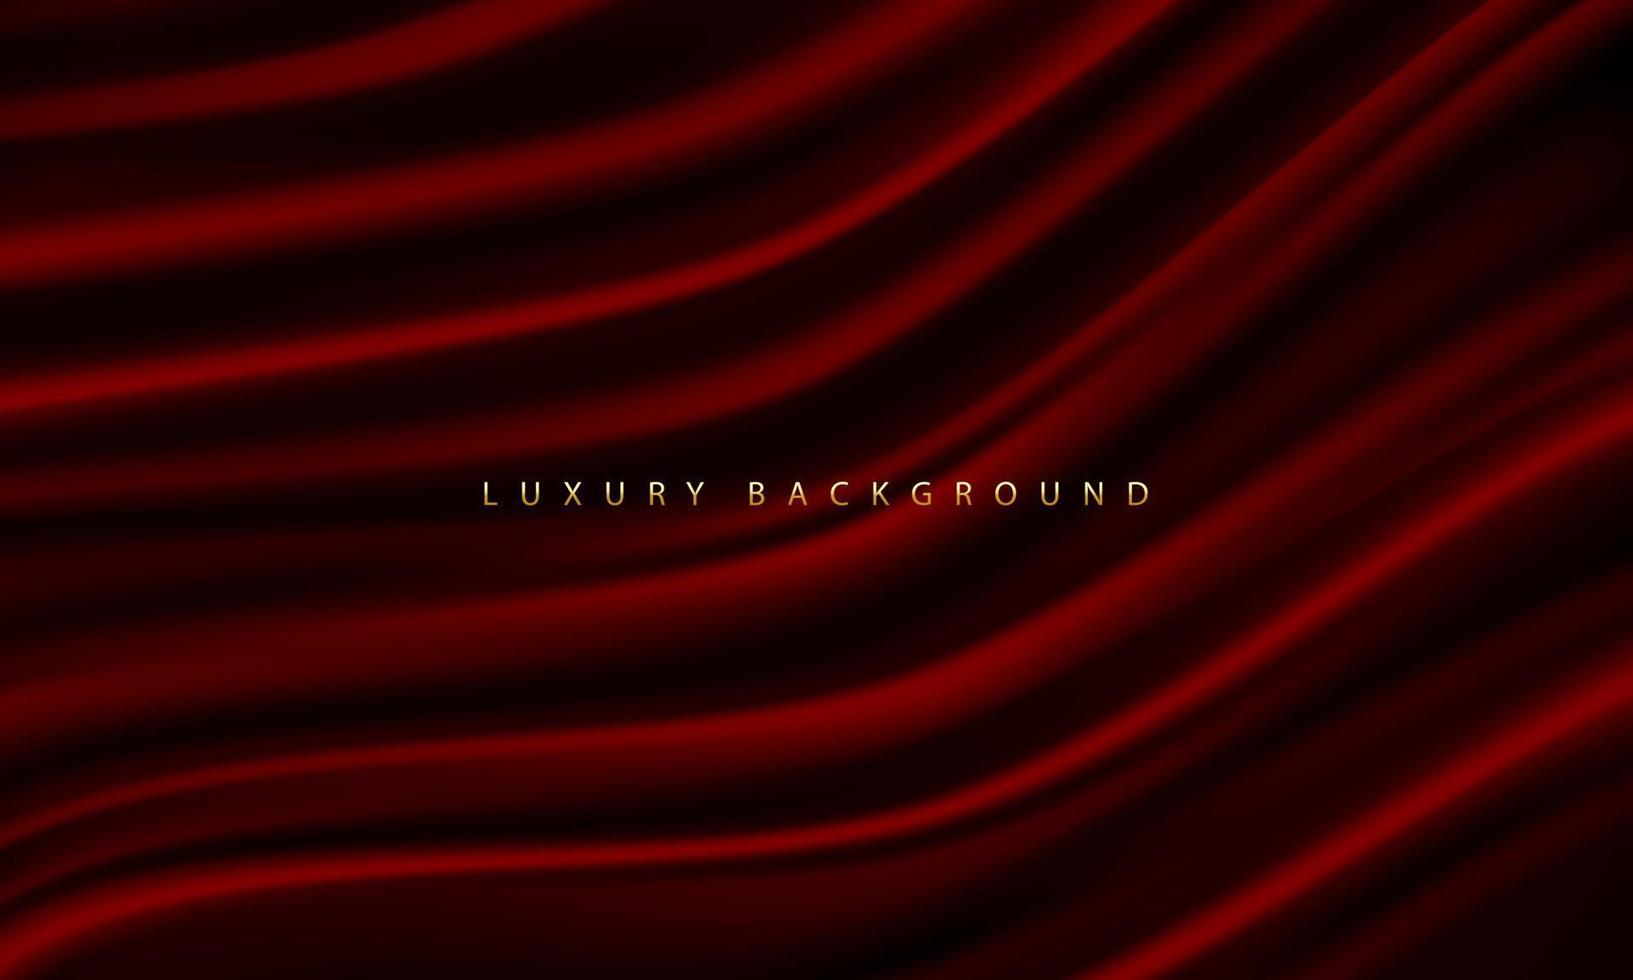 Realistic red fabric wave luxury background texture vector